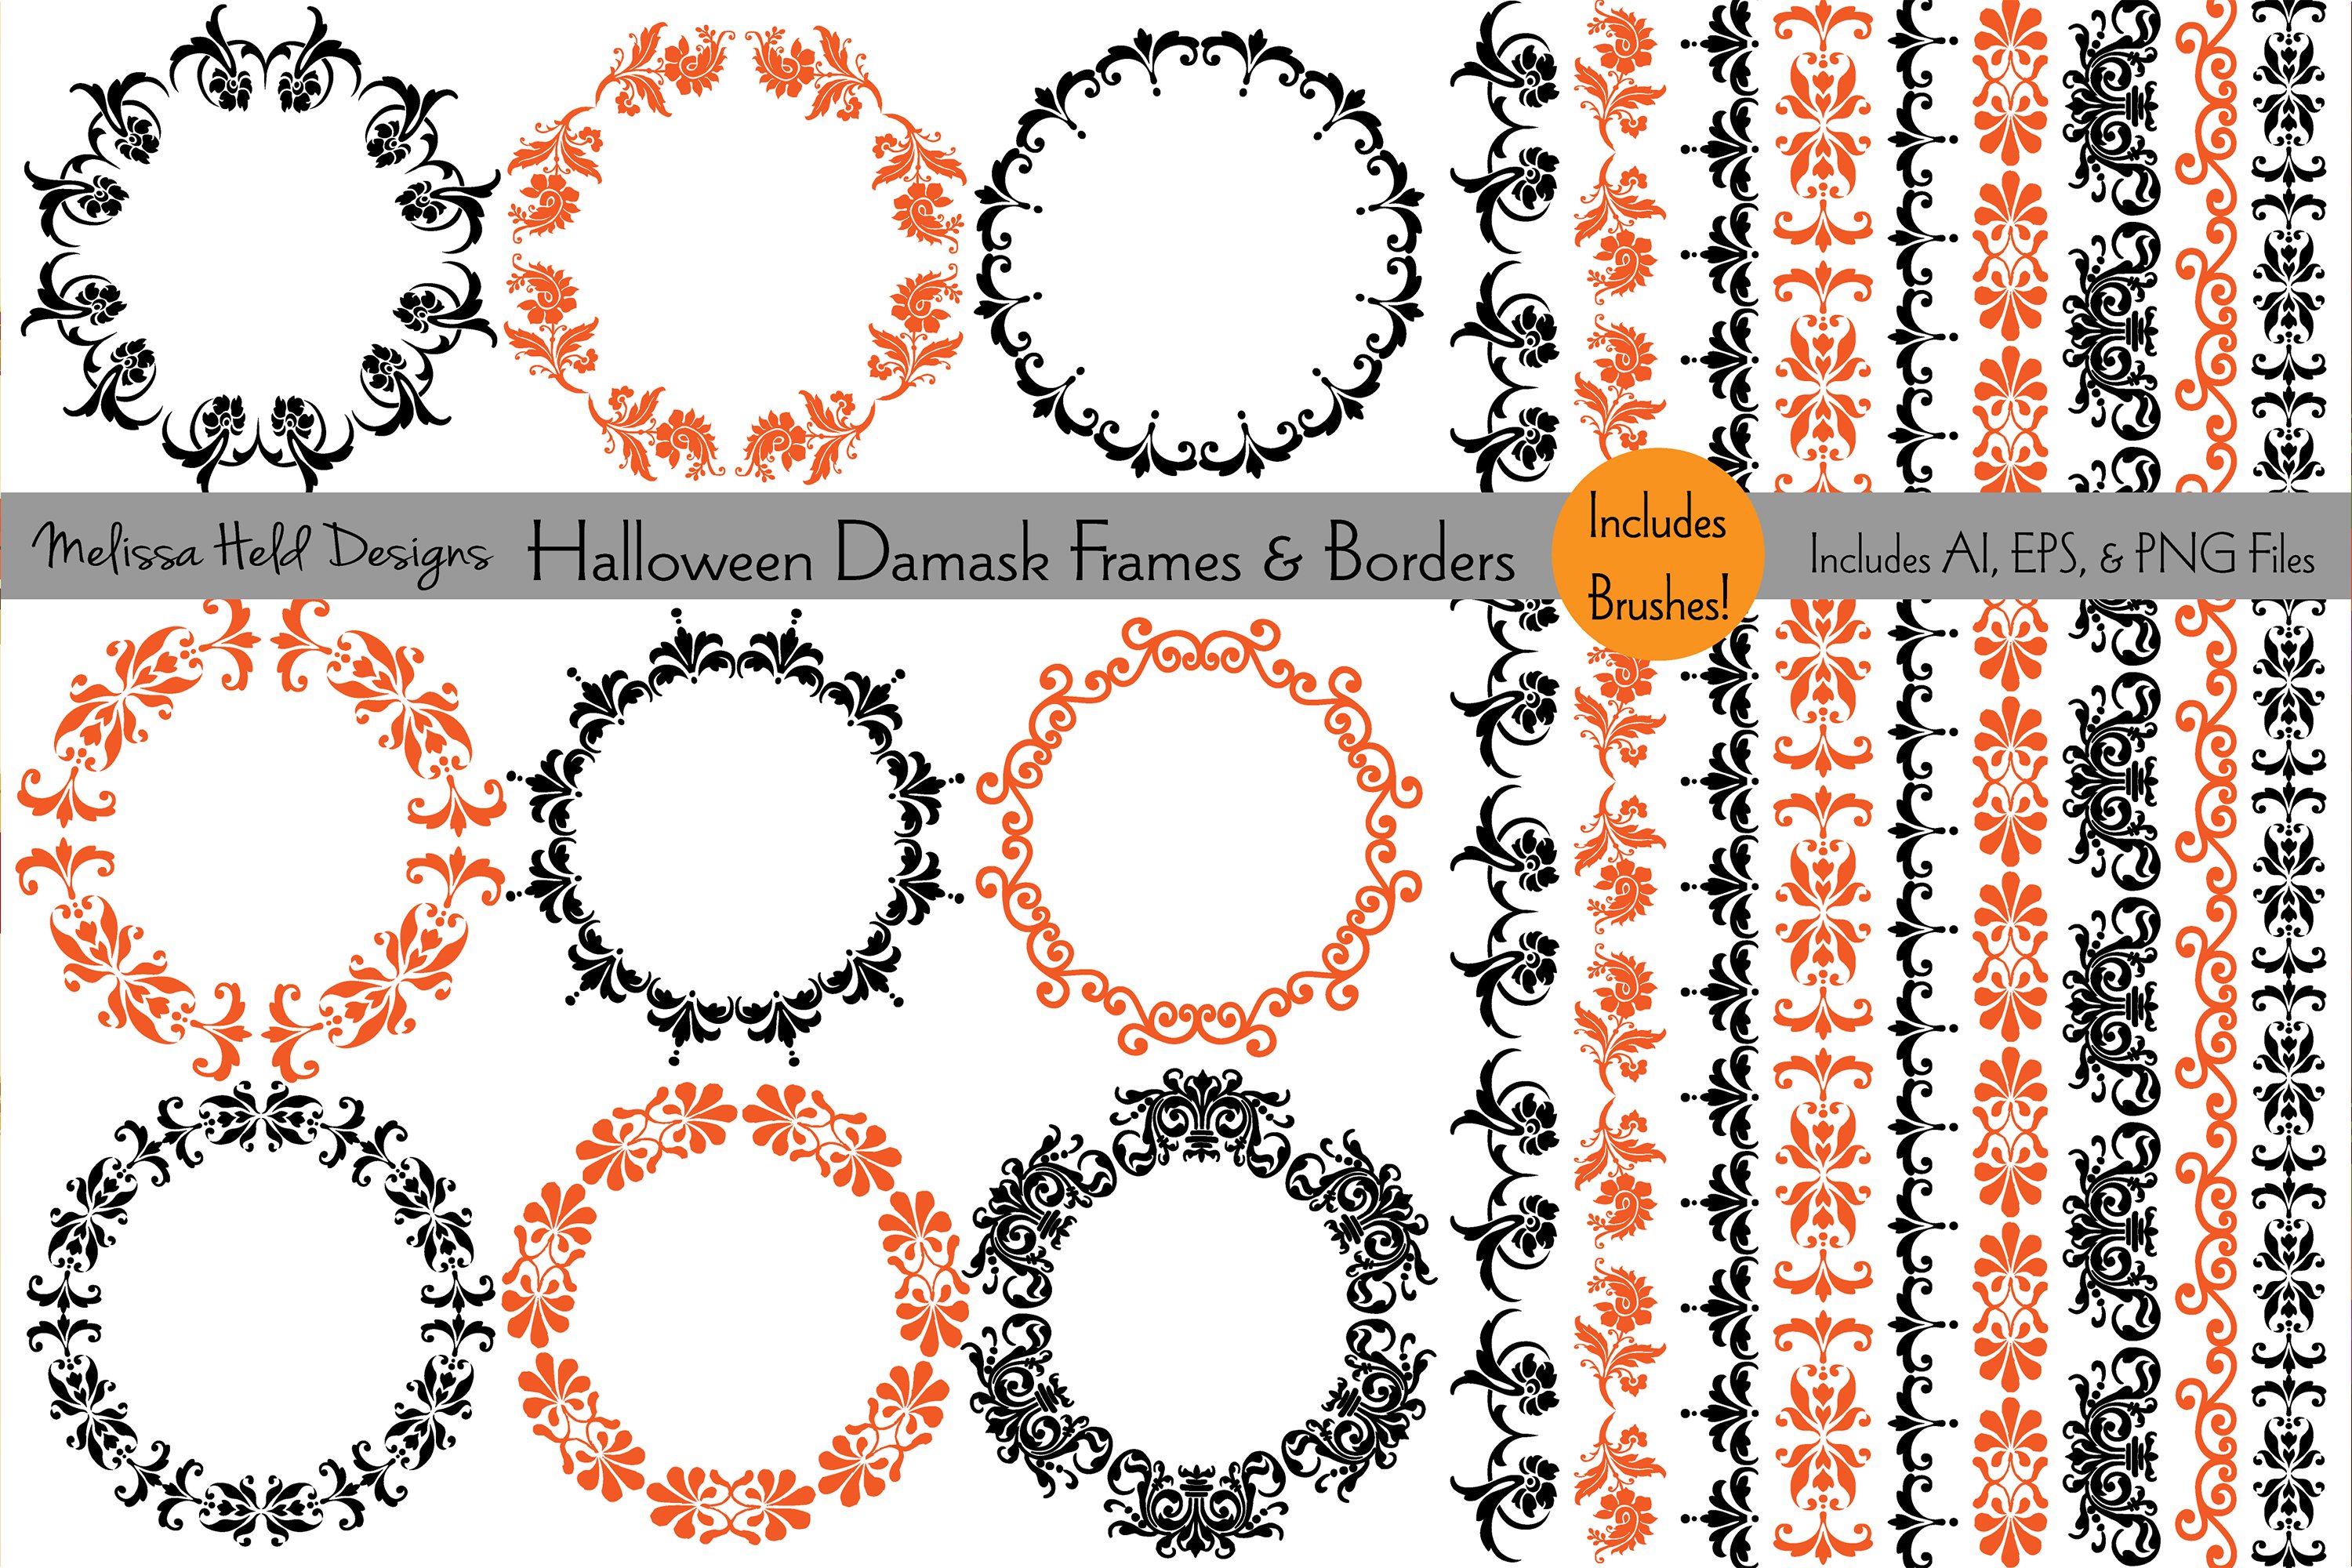 Nice and calm Halloween collection with the borders and frames.